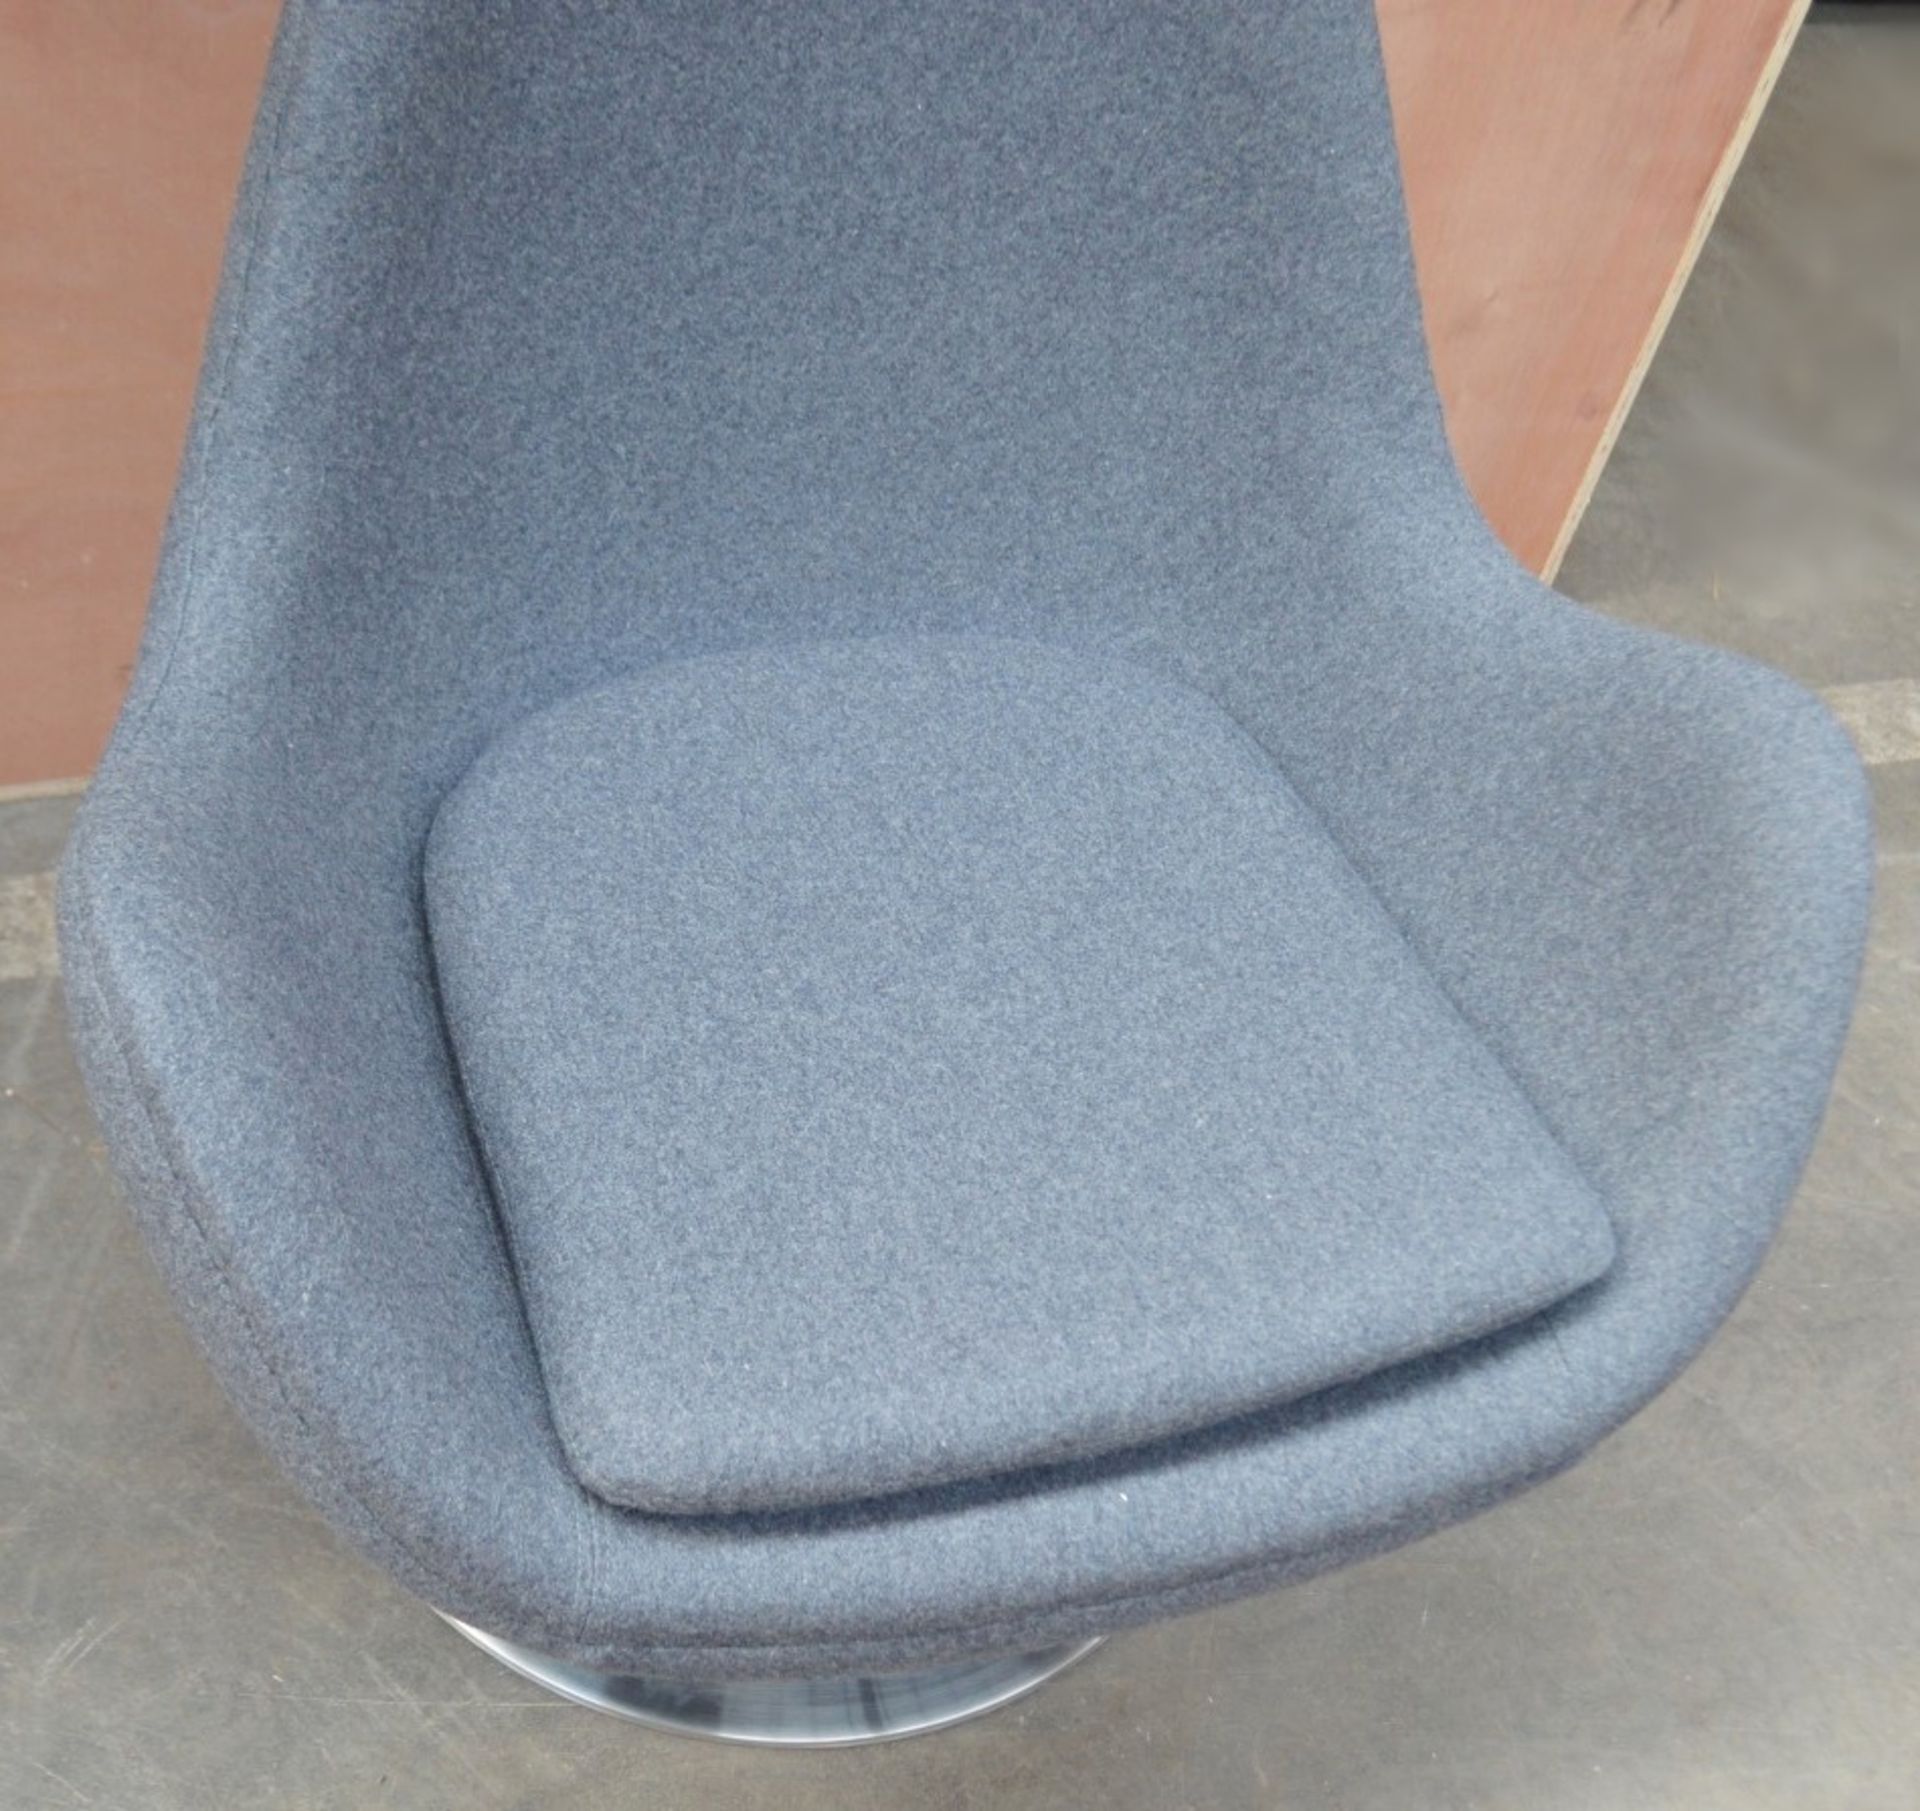 1 x Arne Jacobsen-Inspired Egg Lounge Chair - Upholstered In Grey Cashmere With Steel Base - Image 10 of 13